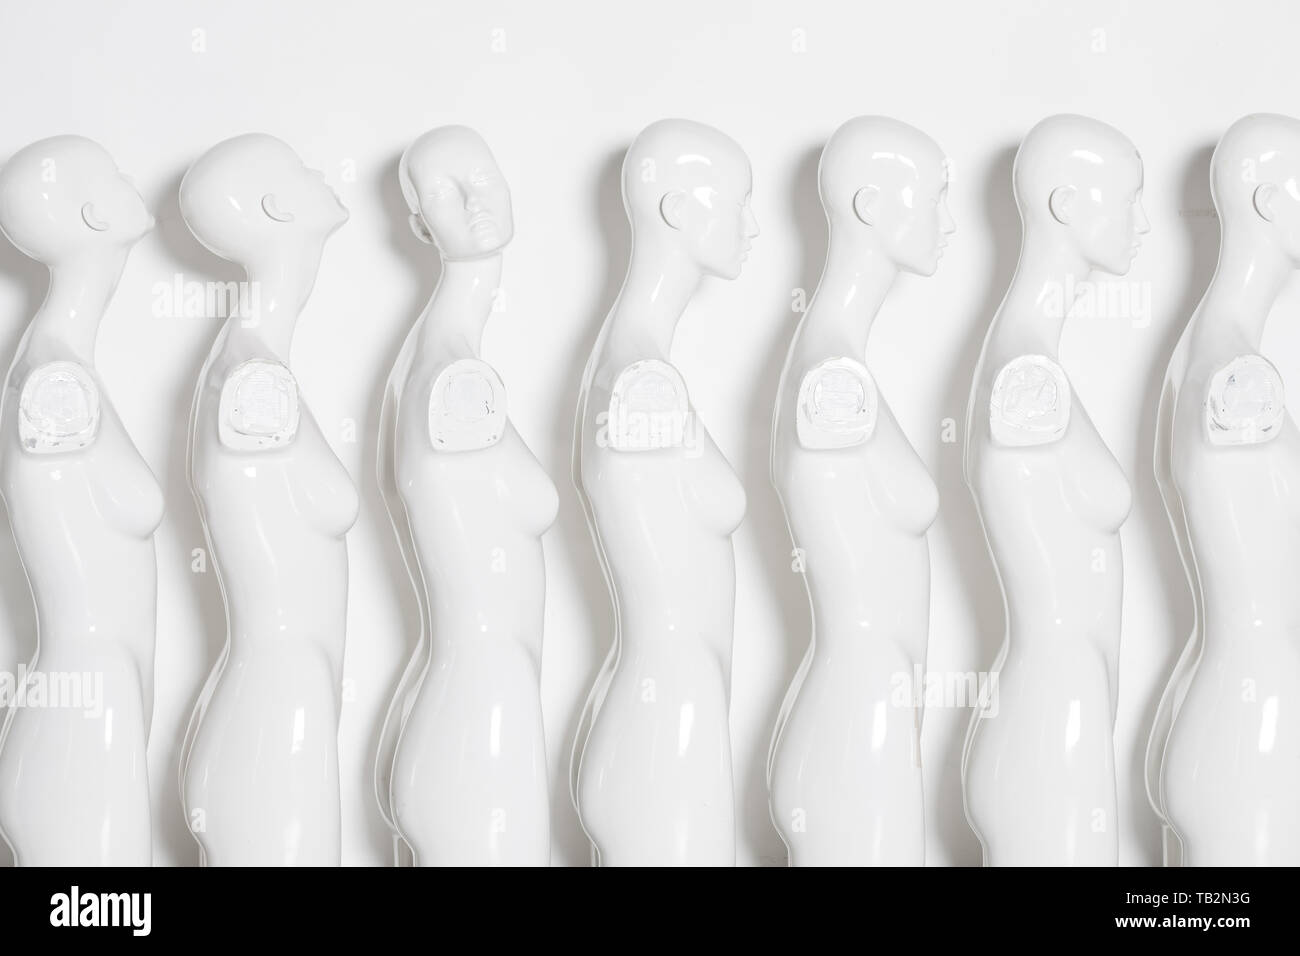 High Key Bright Picture of White Woman Torso Figurines Standing in The Line All But One Looking to Same Direction. Stock Photo